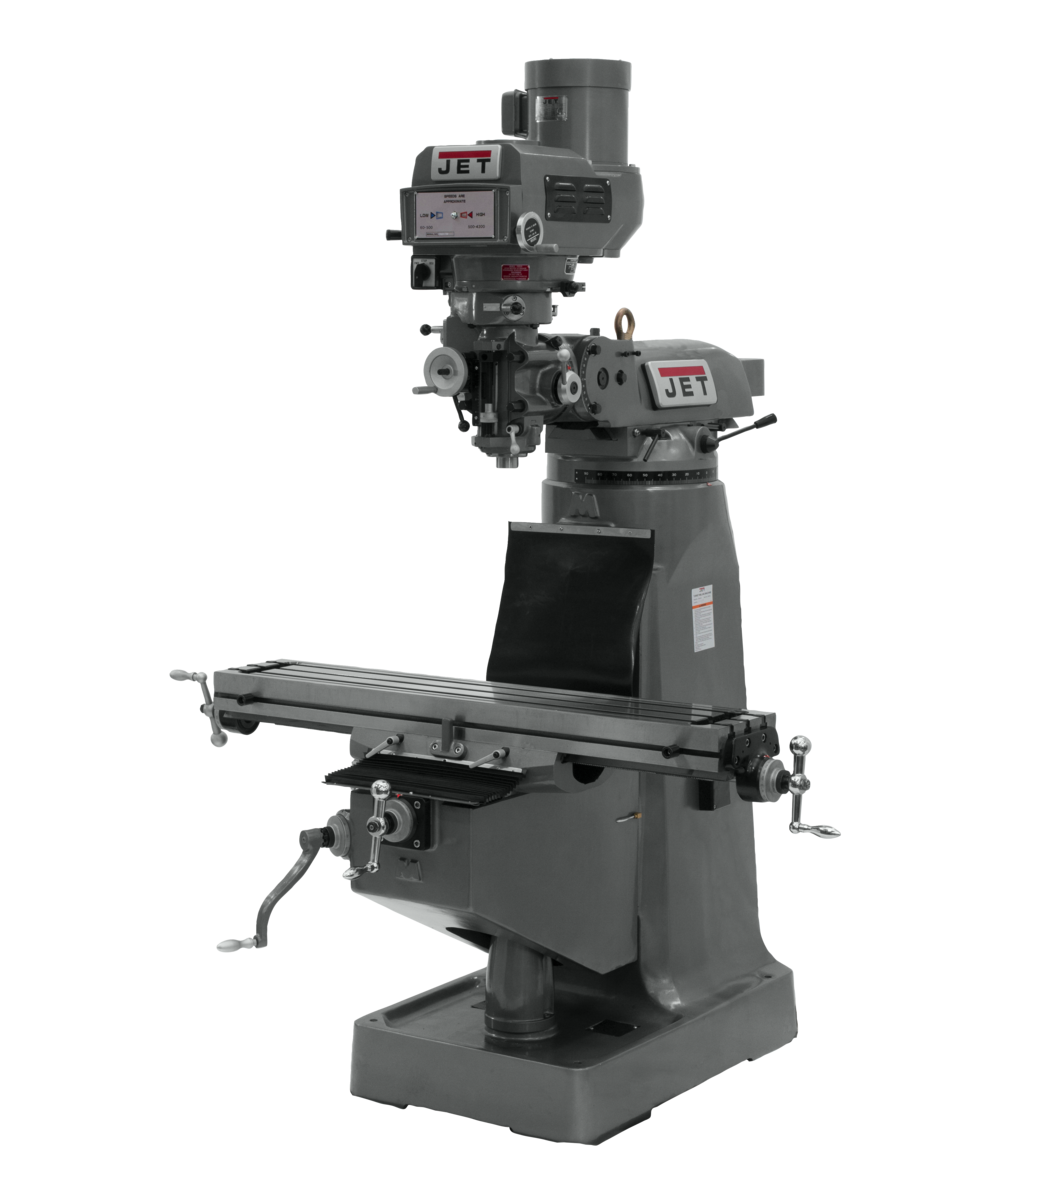 JTM-4VS Mill With 3-Axis ACU-RITE 203 3 Axis (Knee) and Power Draw Bar